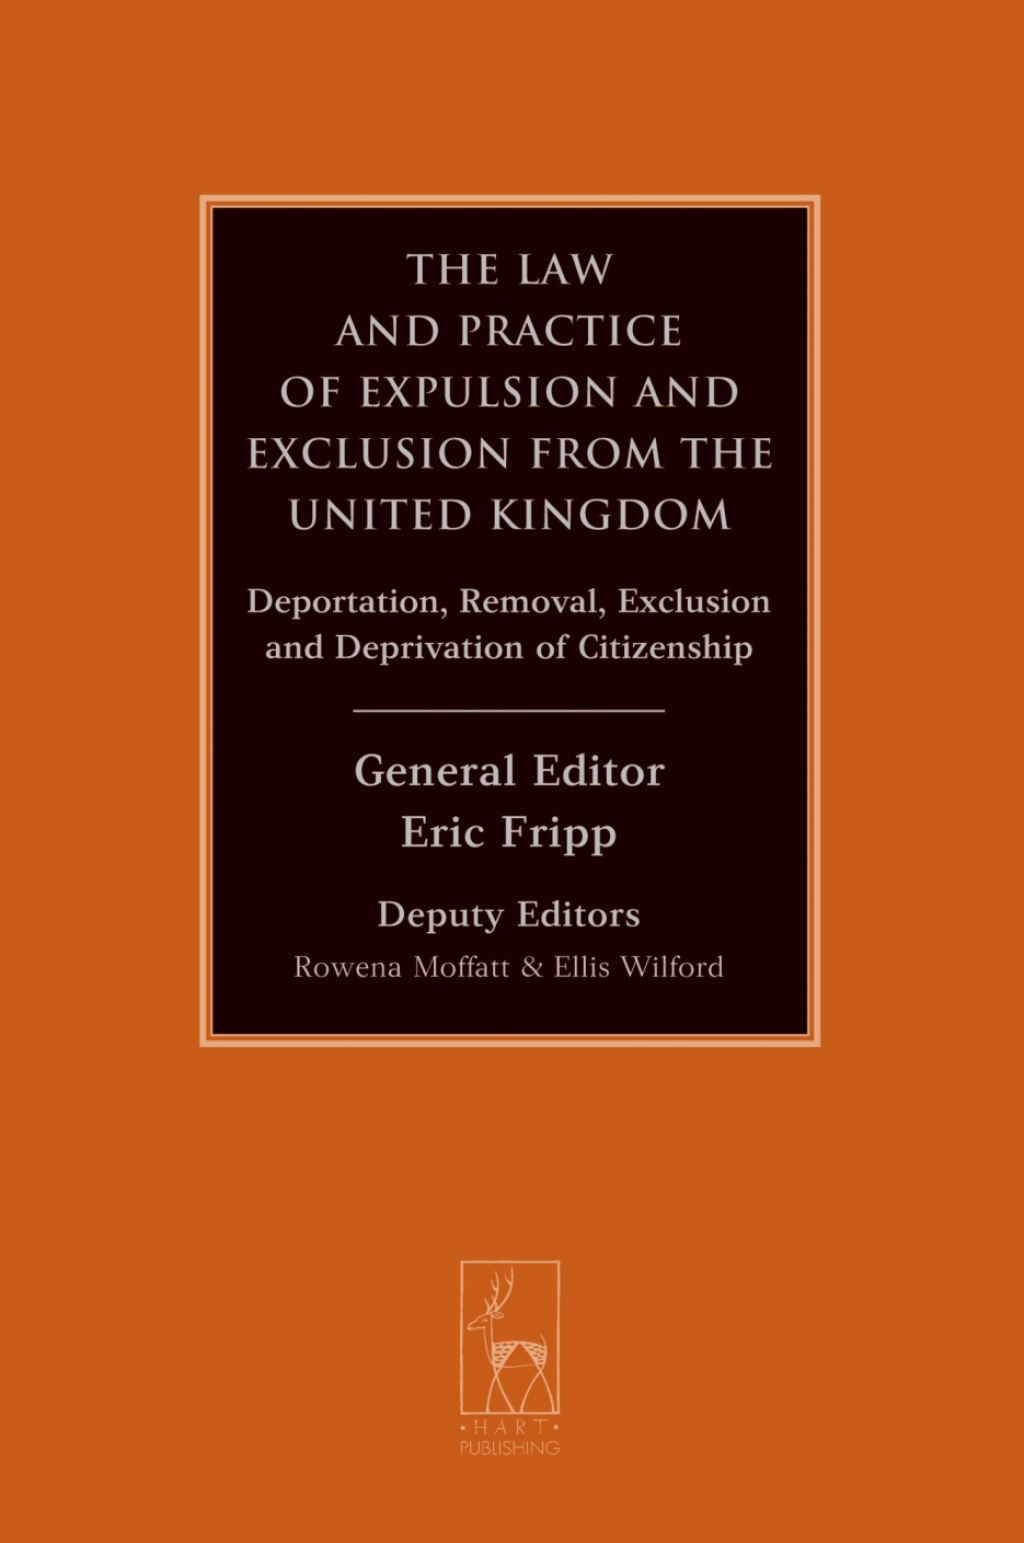 The Law and Practice of Expulsion and Exclusion from the United Kingdom (eBook) - Lord Hope of Craighead KT FRSE PC